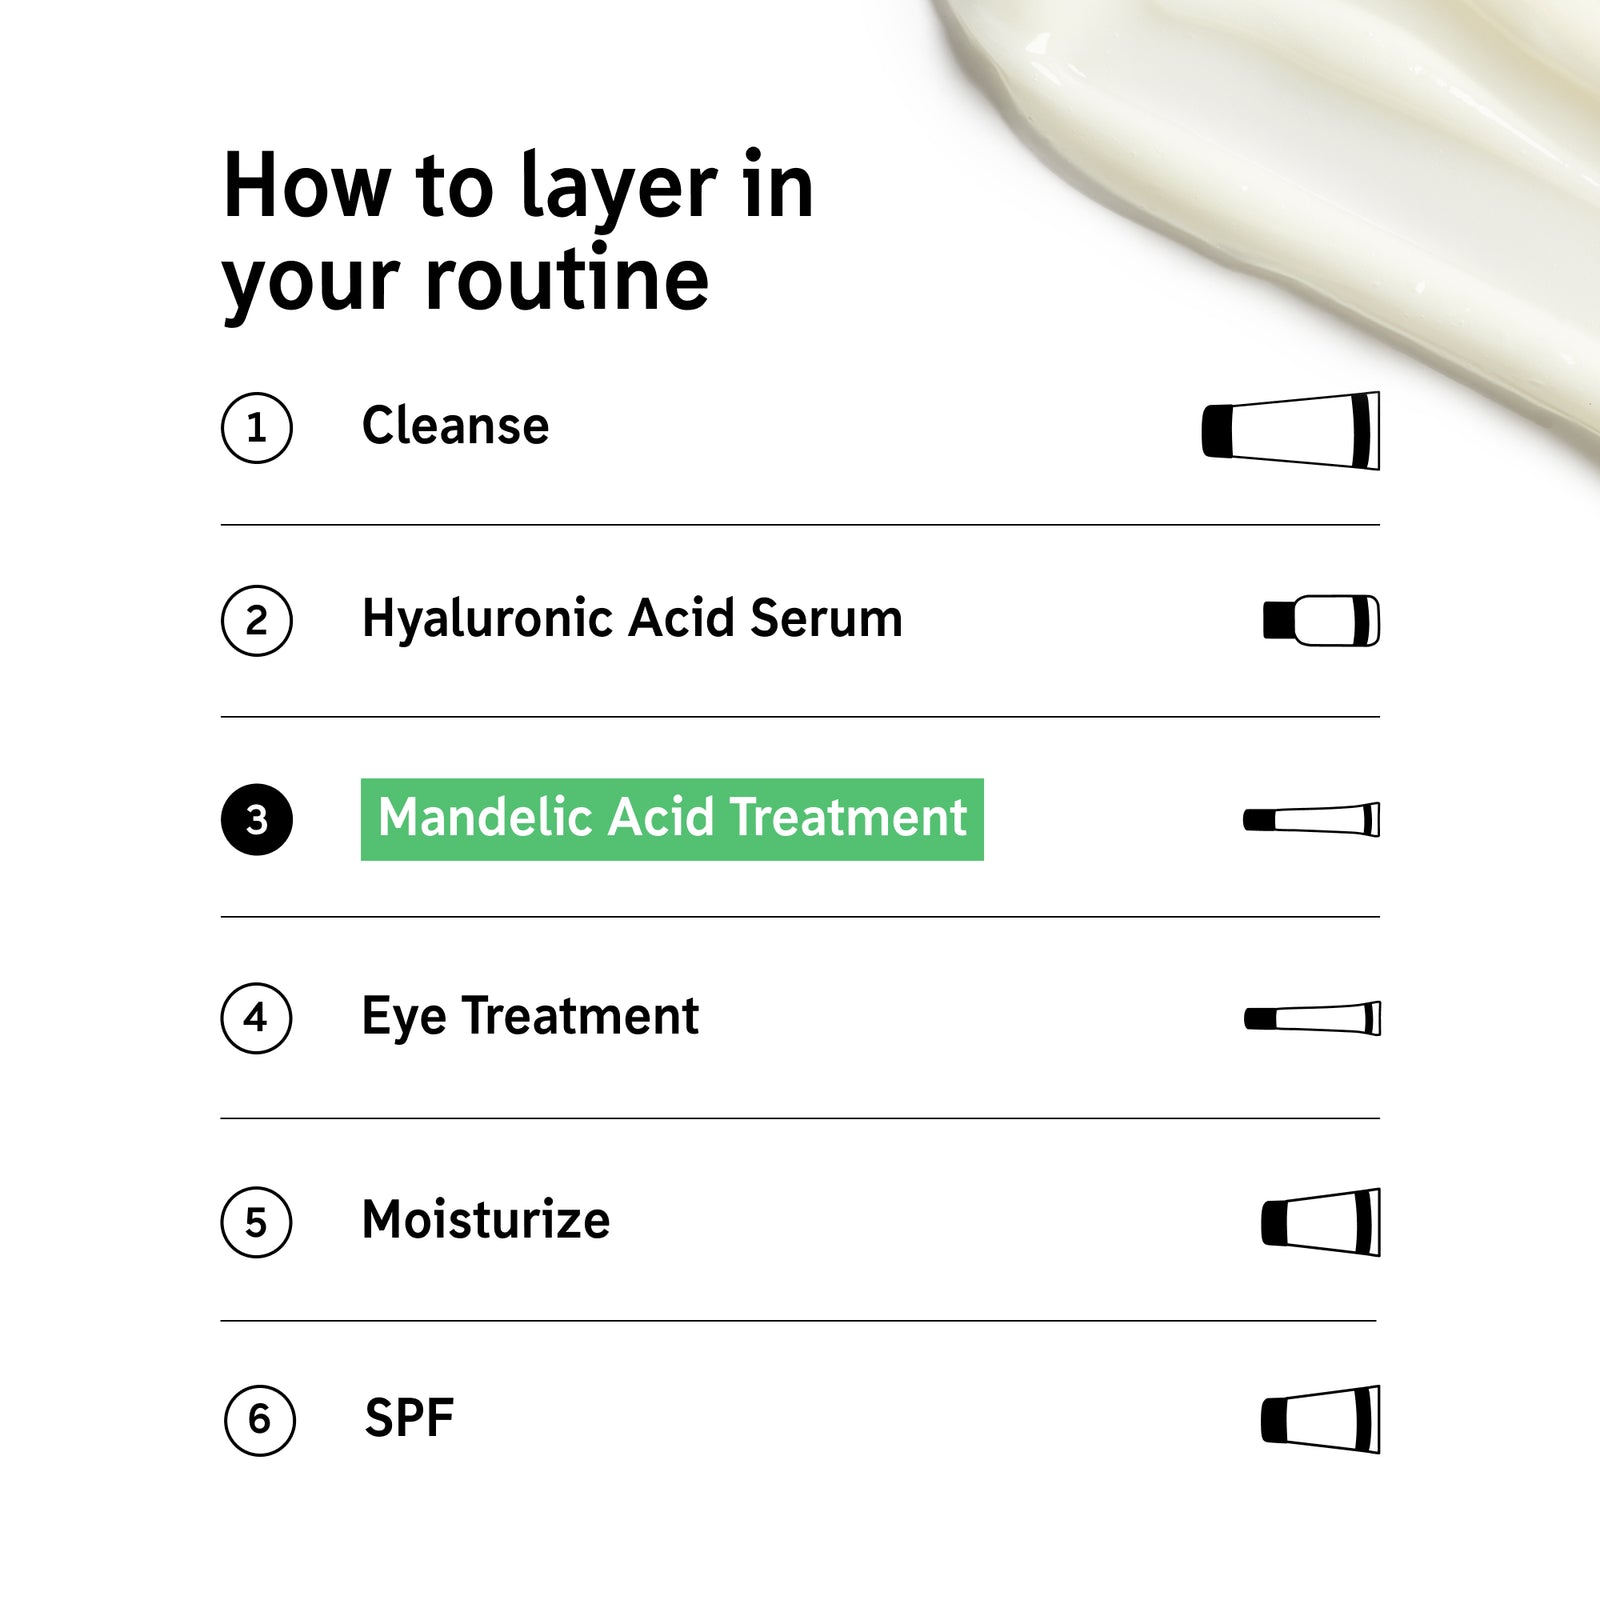 How to layer Mandelic Acid Treatment in your routine